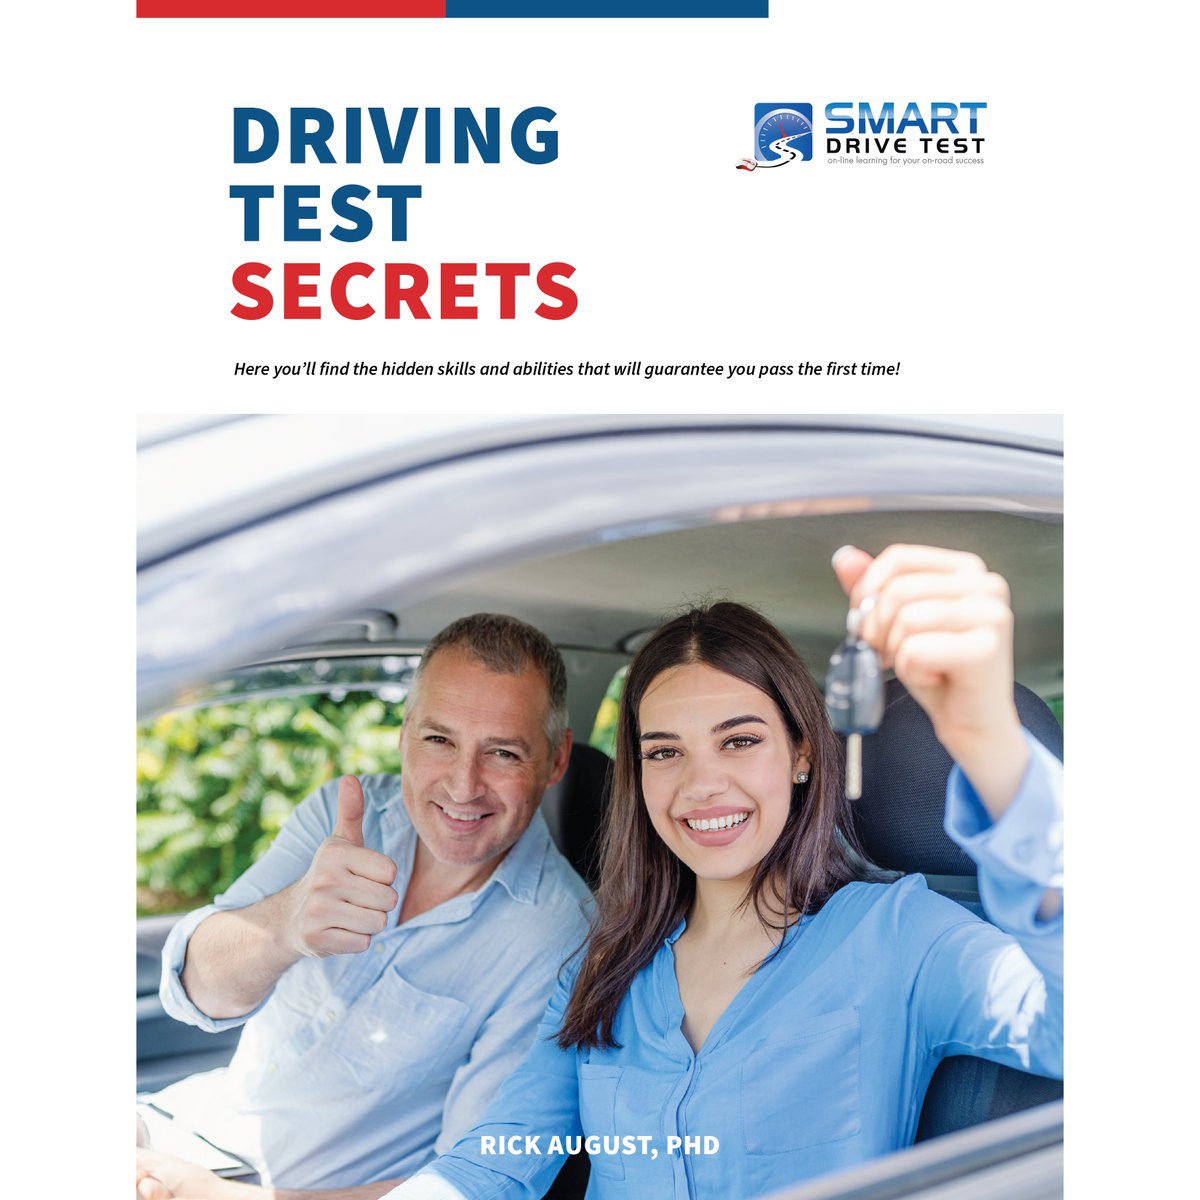 Eager for the freedom of a driver’s license, but sweating over the exam? Use this insider knowledge to give you confidence behind the wheel. CLICK for your copy: amazon.com/Driving-Test-S…